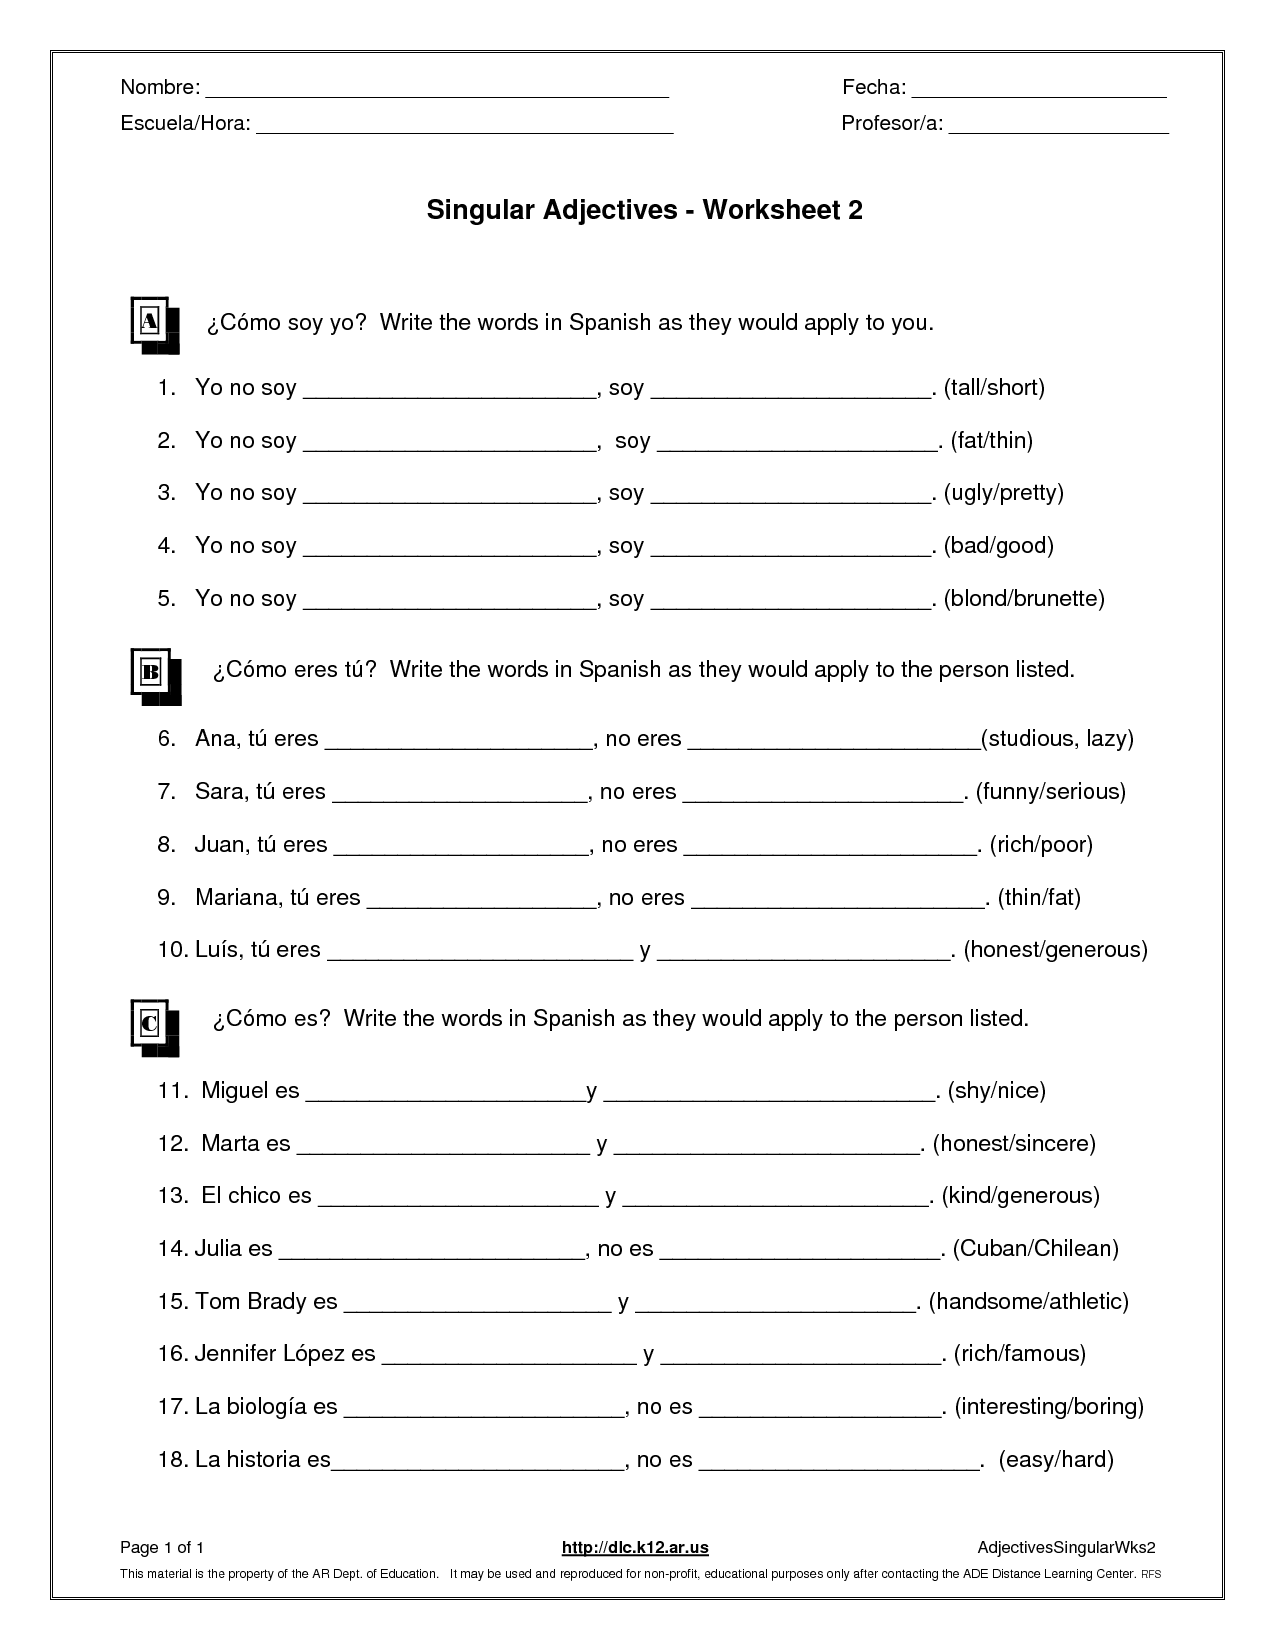 plural-possessive-nouns-worksheets-with-answers